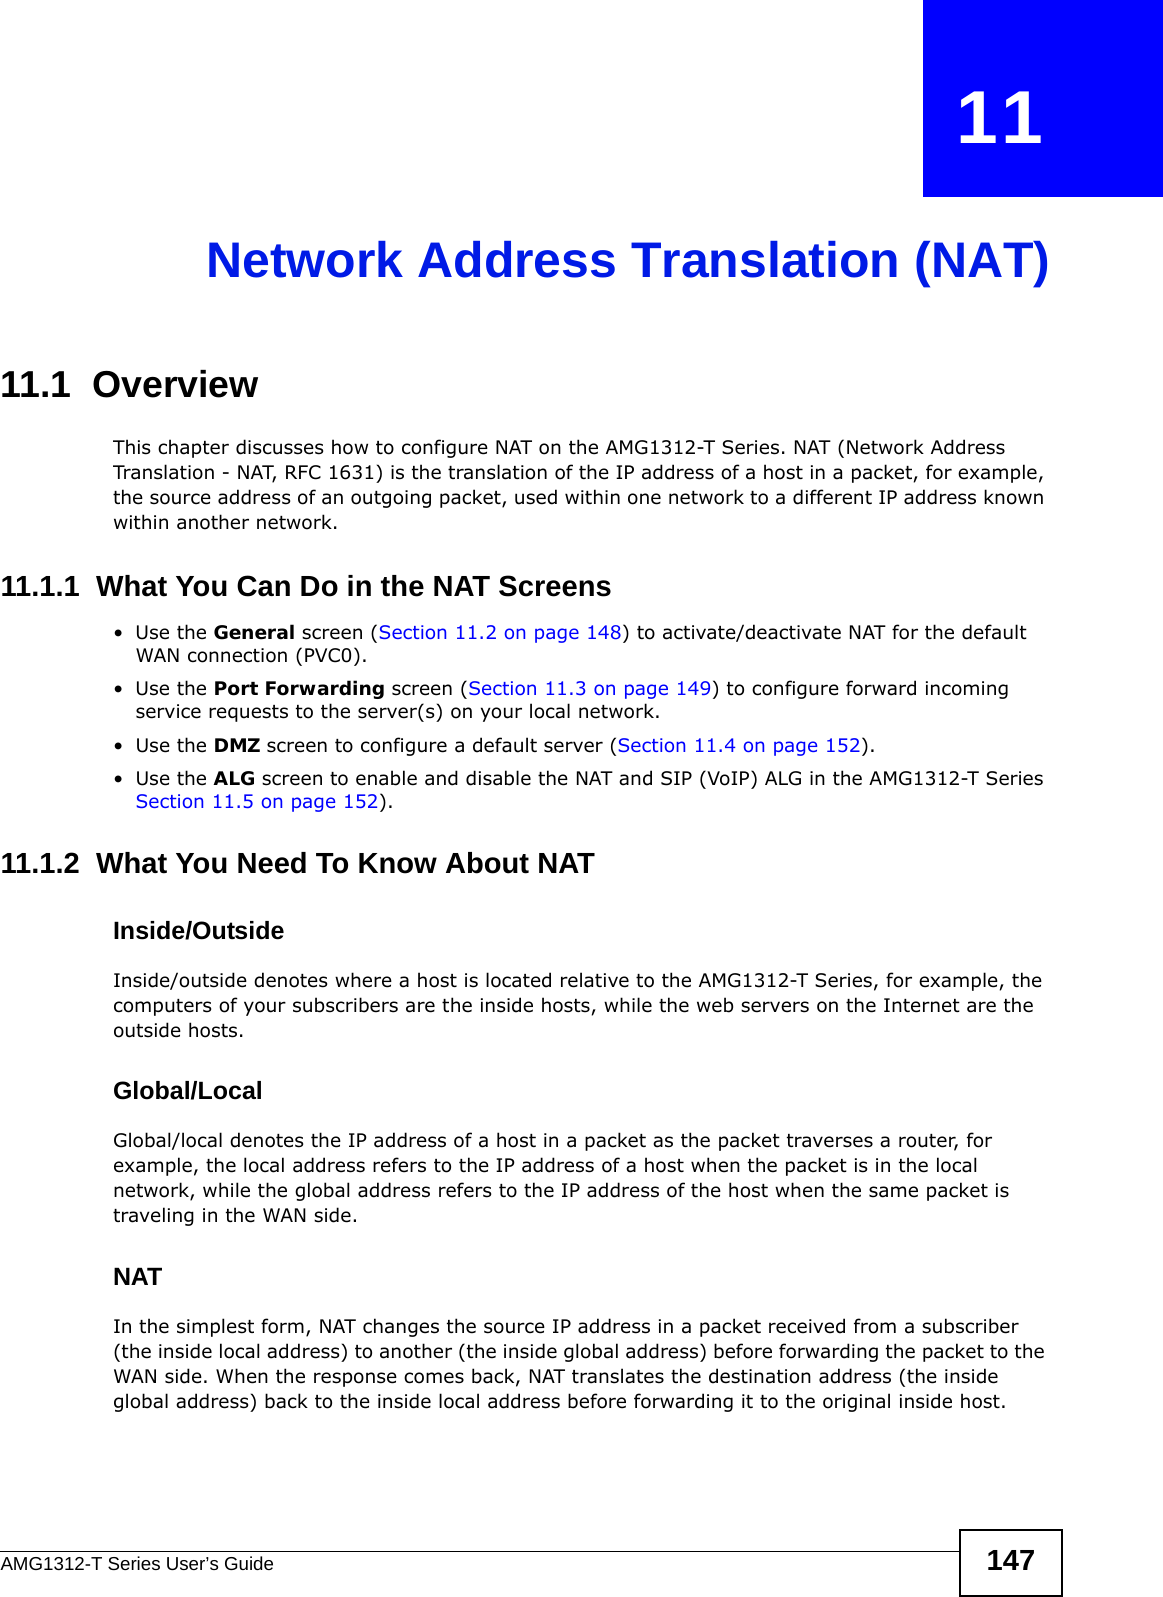 AMG1312-T Series User’s Guide 147CHAPTER   11Network Address Translation (NAT)11.1  OverviewThis chapter discusses how to configure NAT on the AMG1312-T Series. NAT (Network Address Translation - NAT, RFC 1631) is the translation of the IP address of a host in a packet, for example, the source address of an outgoing packet, used within one network to a different IP address known within another network.11.1.1  What You Can Do in the NAT Screens•Use the General screen (Section 11.2 on page 148) to activate/deactivate NAT for the default WAN connection (PVC0).•Use the Port Forwarding screen (Section 11.3 on page 149) to configure forward incoming service requests to the server(s) on your local network. •Use the DMZ screen to configure a default server (Section 11.4 on page 152).•Use the ALG screen to enable and disable the NAT and SIP (VoIP) ALG in the AMG1312-T Series Section 11.5 on page 152).11.1.2  What You Need To Know About NATInside/OutsideInside/outside denotes where a host is located relative to the AMG1312-T Series, for example, the computers of your subscribers are the inside hosts, while the web servers on the Internet are the outside hosts. Global/LocalGlobal/local denotes the IP address of a host in a packet as the packet traverses a router, for example, the local address refers to the IP address of a host when the packet is in the local network, while the global address refers to the IP address of the host when the same packet is traveling in the WAN side. NATIn the simplest form, NAT changes the source IP address in a packet received from a subscriber (the inside local address) to another (the inside global address) before forwarding the packet to the WAN side. When the response comes back, NAT translates the destination address (the inside global address) back to the inside local address before forwarding it to the original inside host.